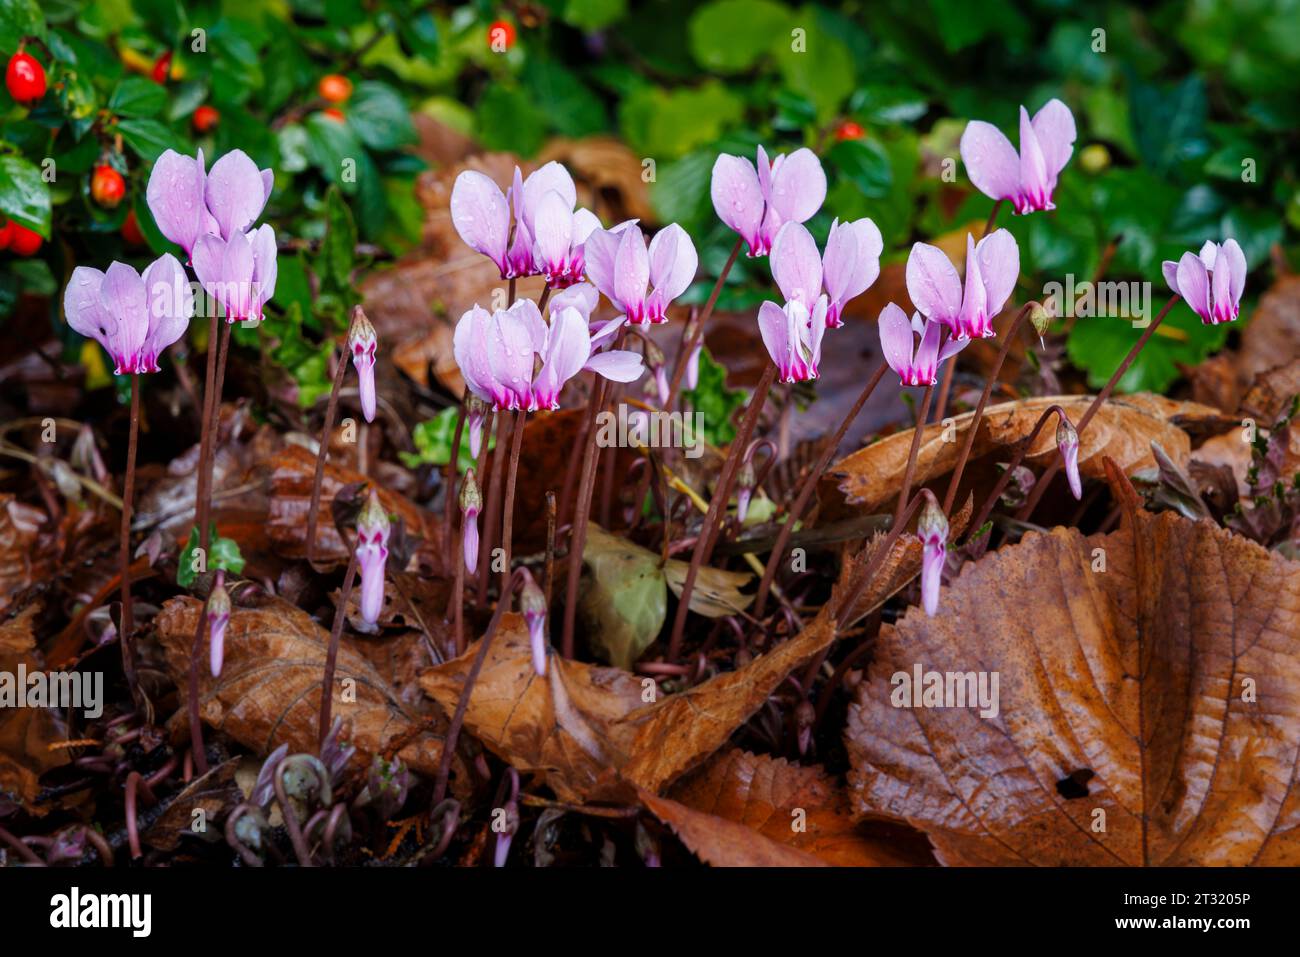 Pretty mauve flowers of autumn flowering Cyclamen Hederifolium with raindrops blooming amongst brown fallen leaves in Surrey, south-east England Stock Photo